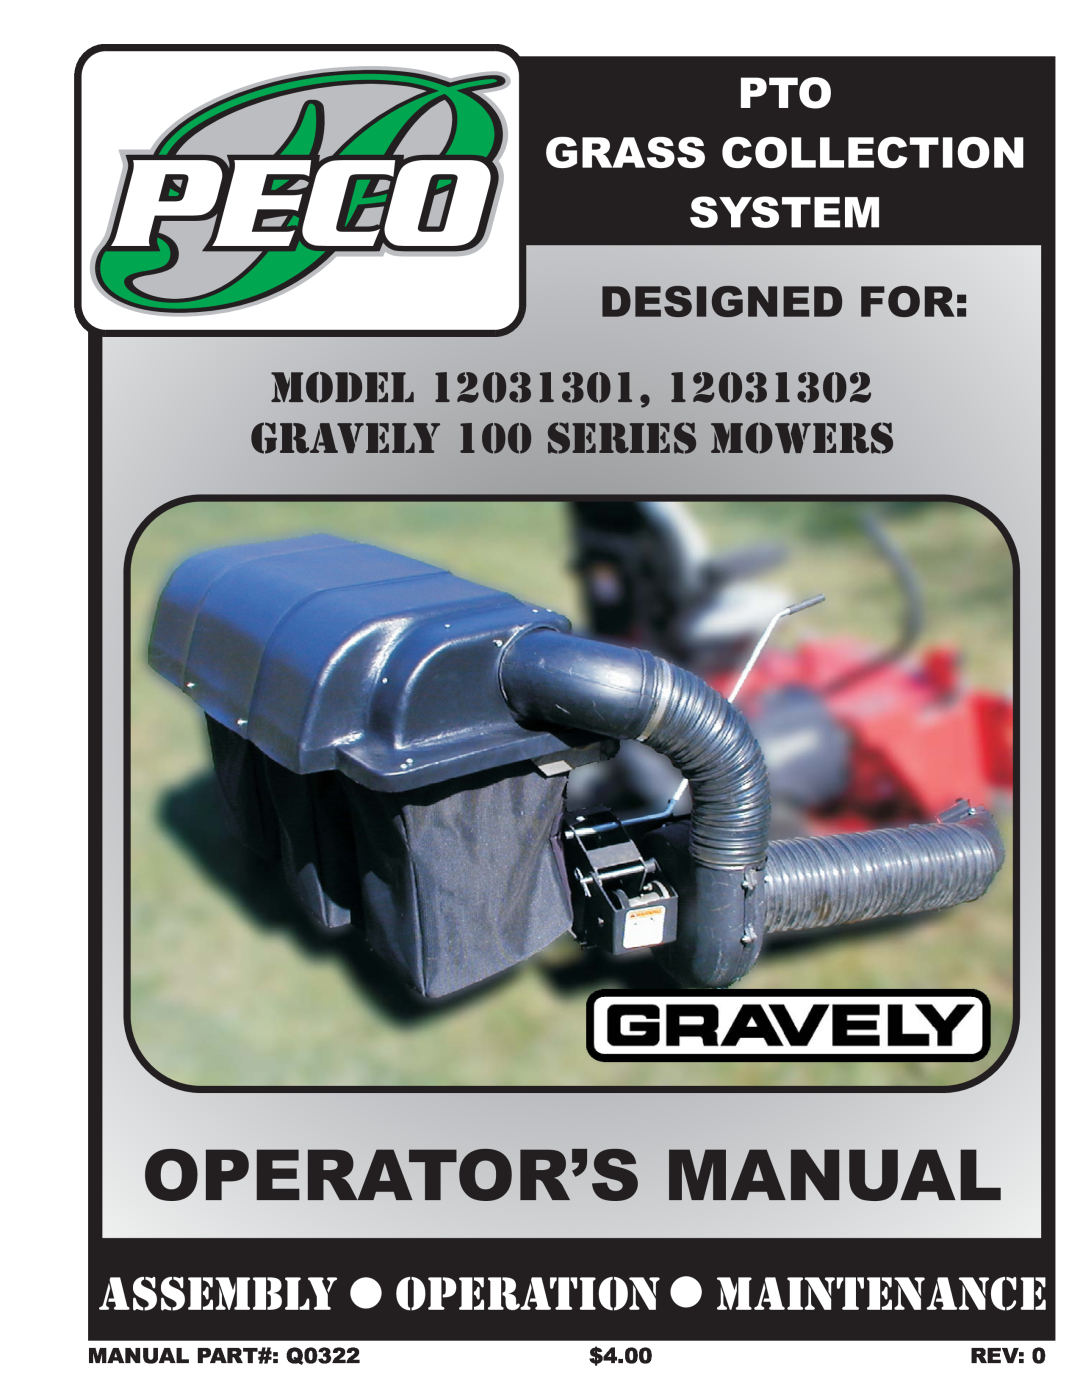 Gravely 12031301, 12031302 manual Peco System Designed For, MANUAL PART# Q0322, $4.00, Operator’S Manual 